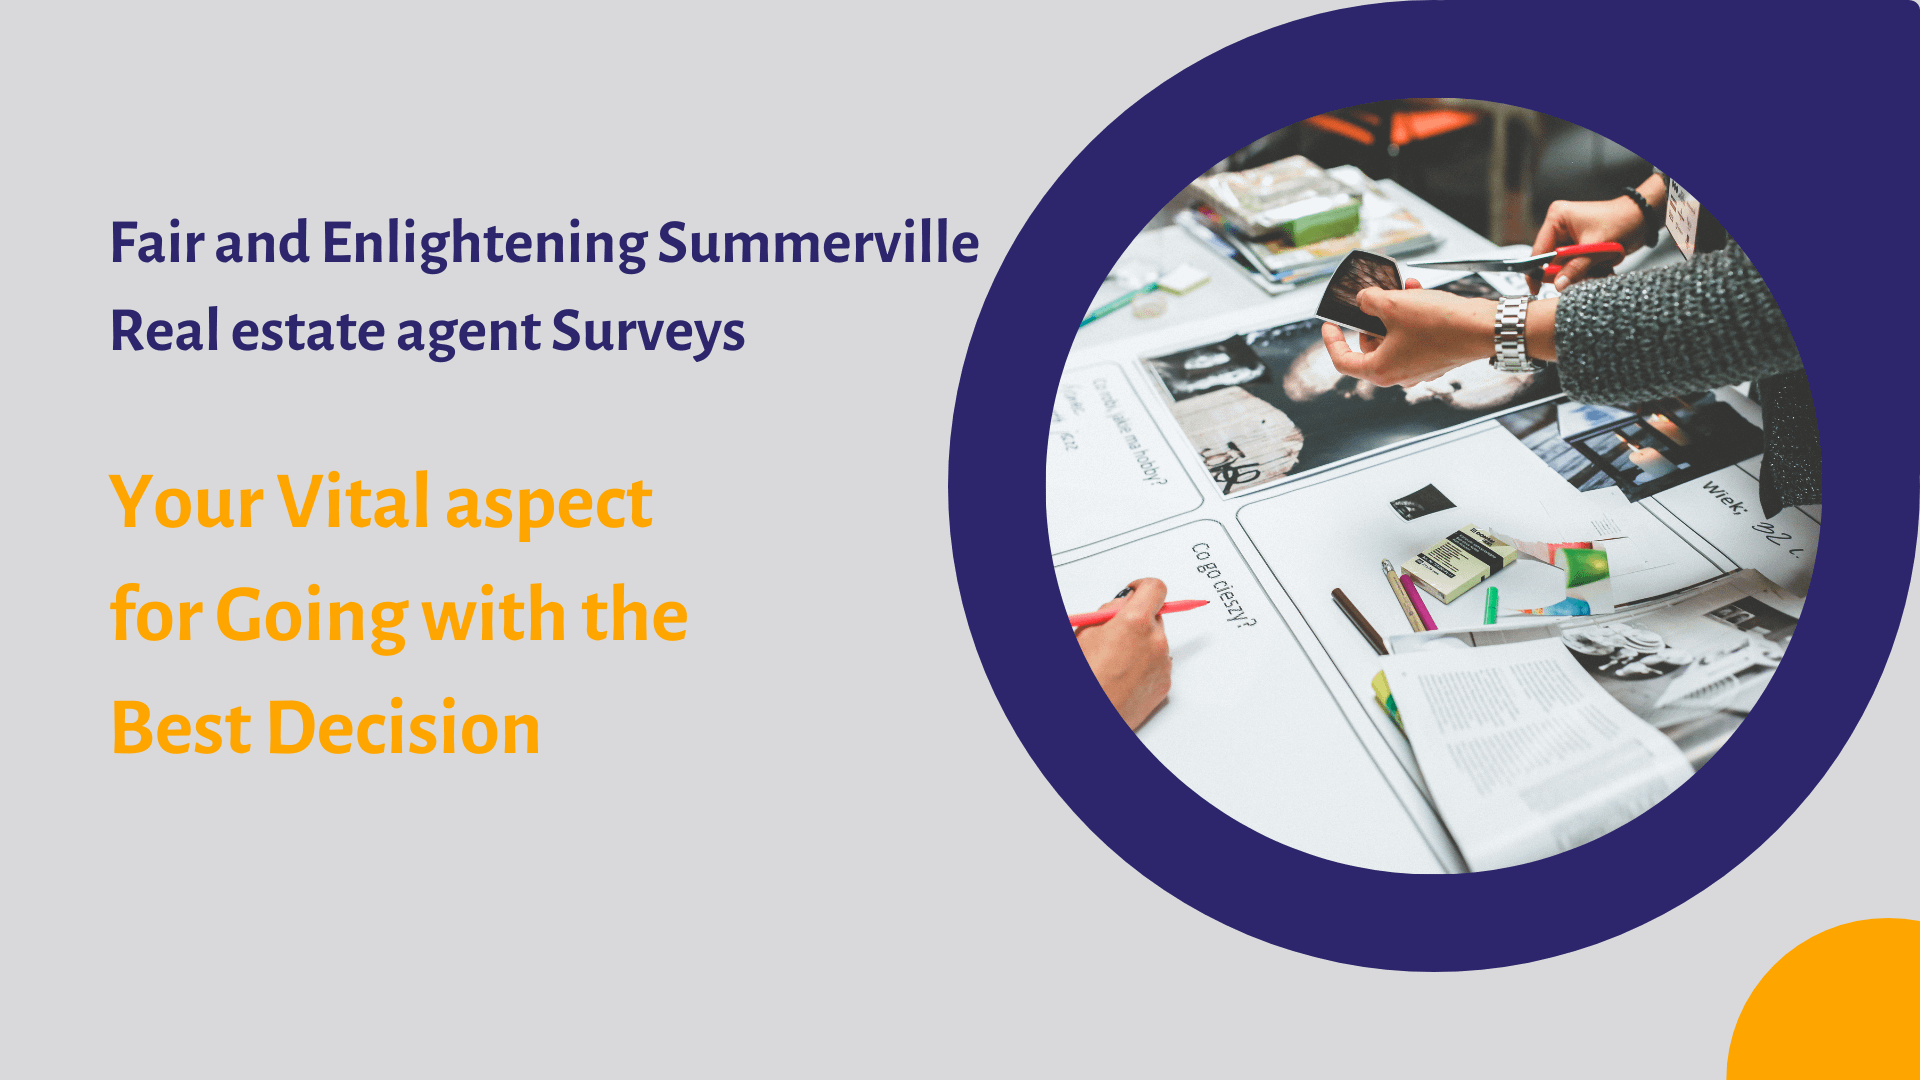 Fair and Enlightening Summerville Real estate agent Surveys: Your Vital aspect for Going with the Best Decision